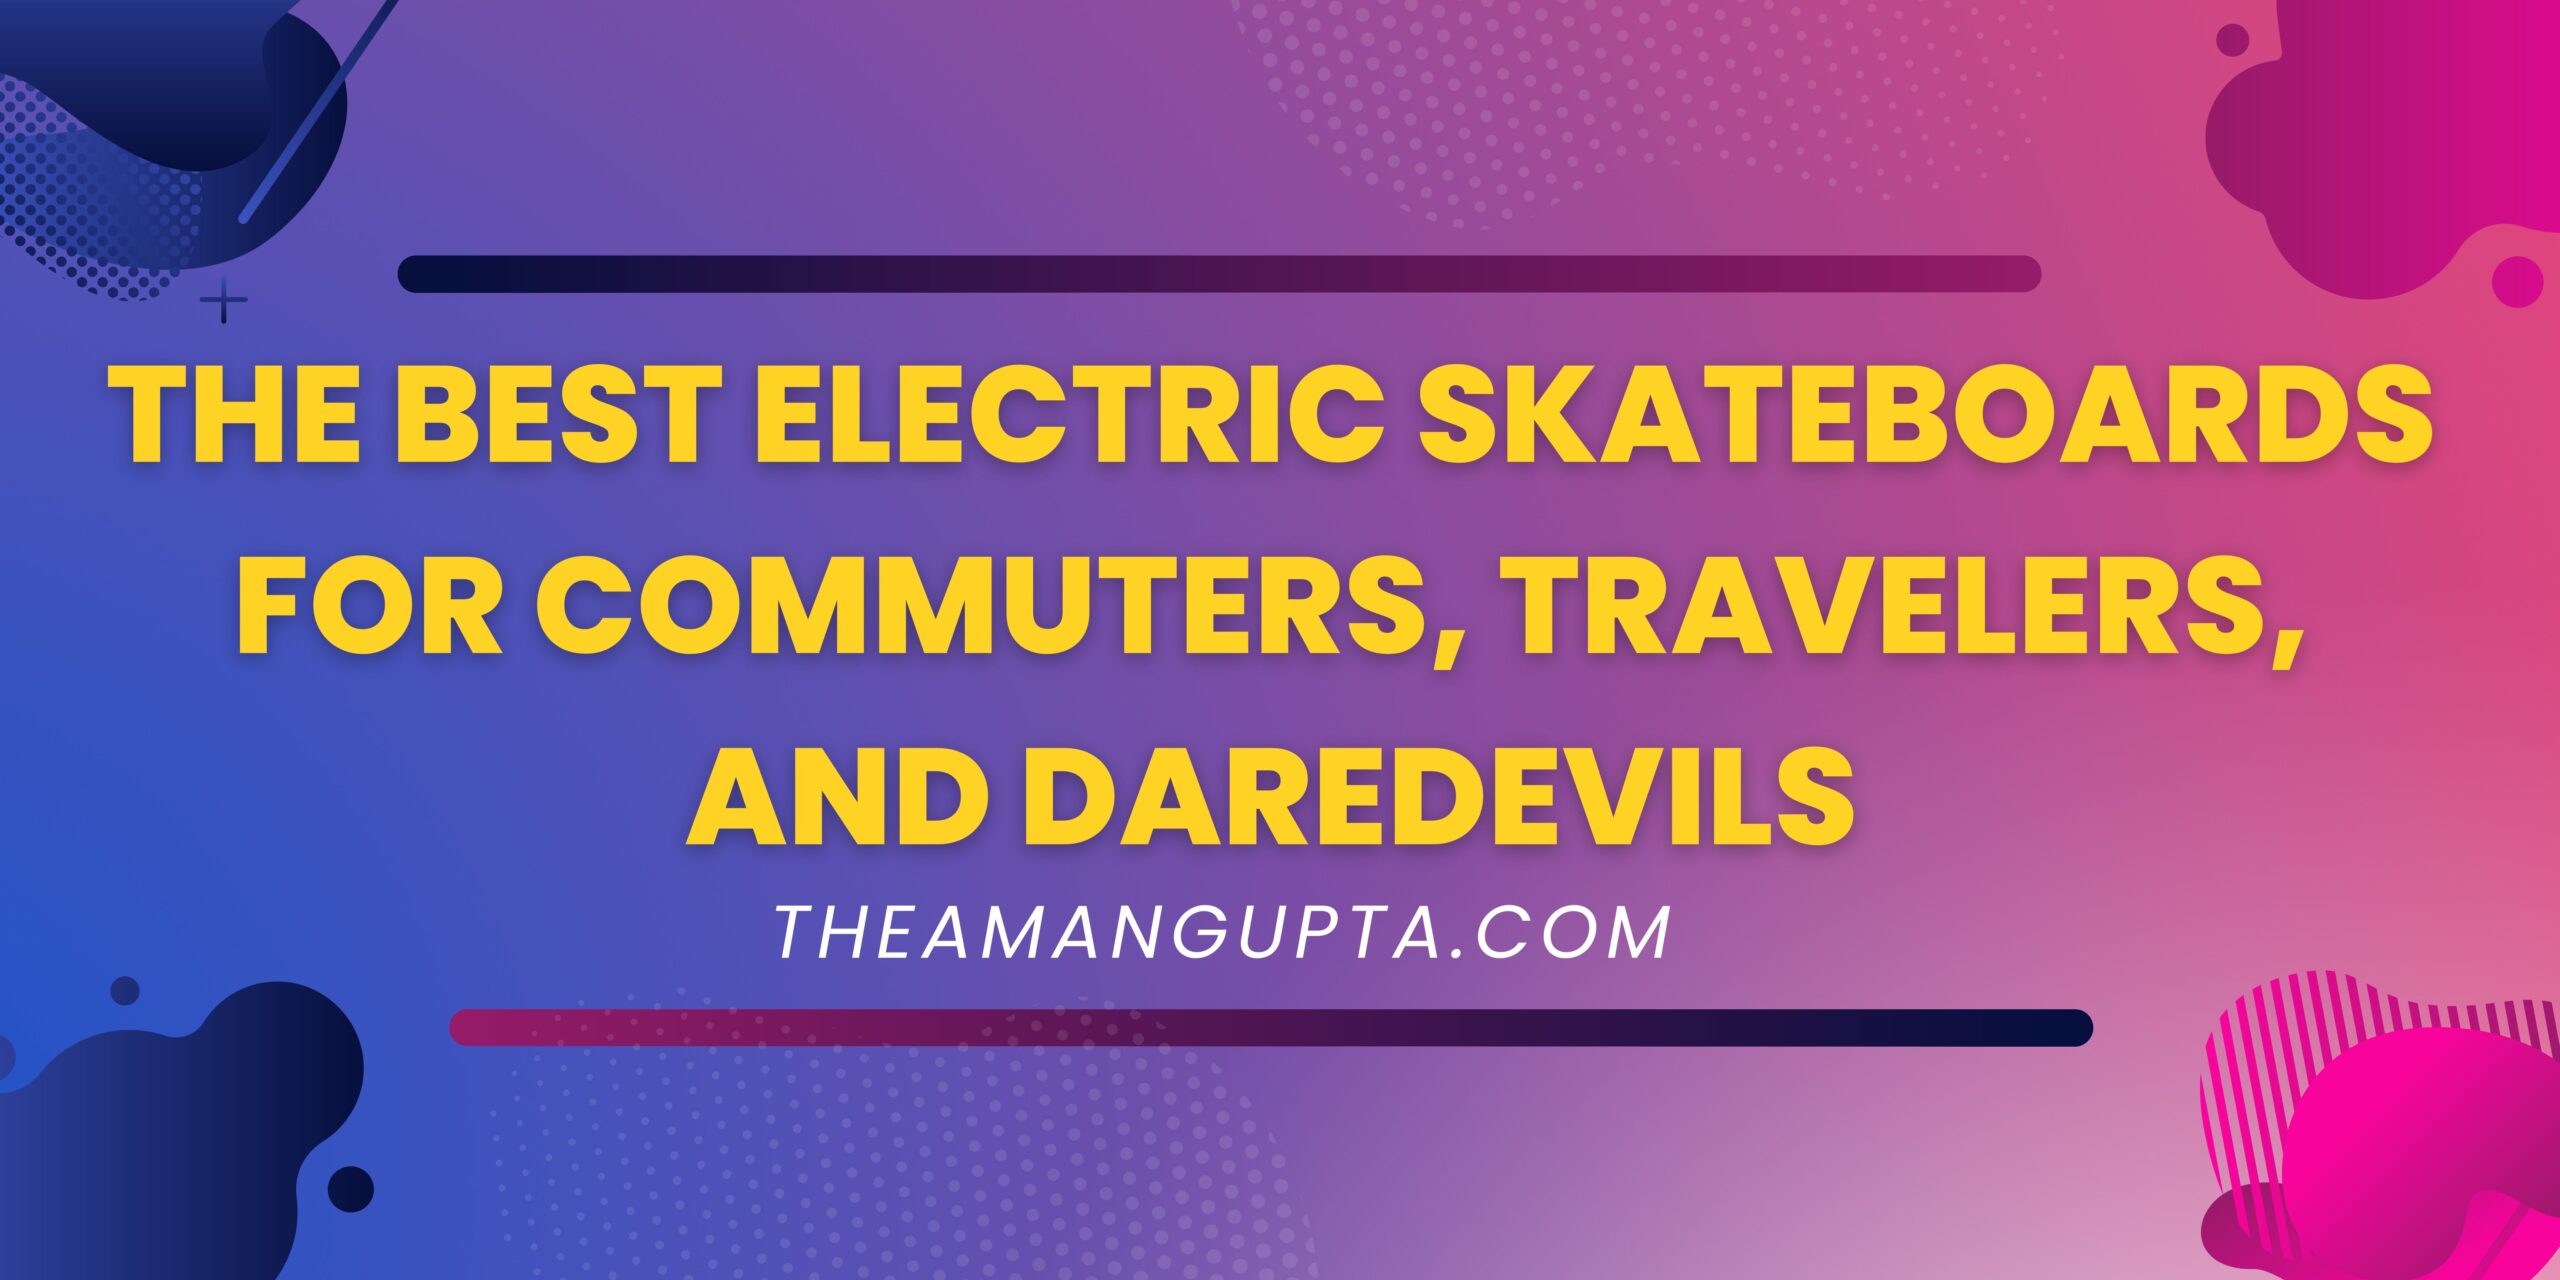 The Best Electric Skateboards for Commuters|TSkaters|Theamangupta|Theamangupta